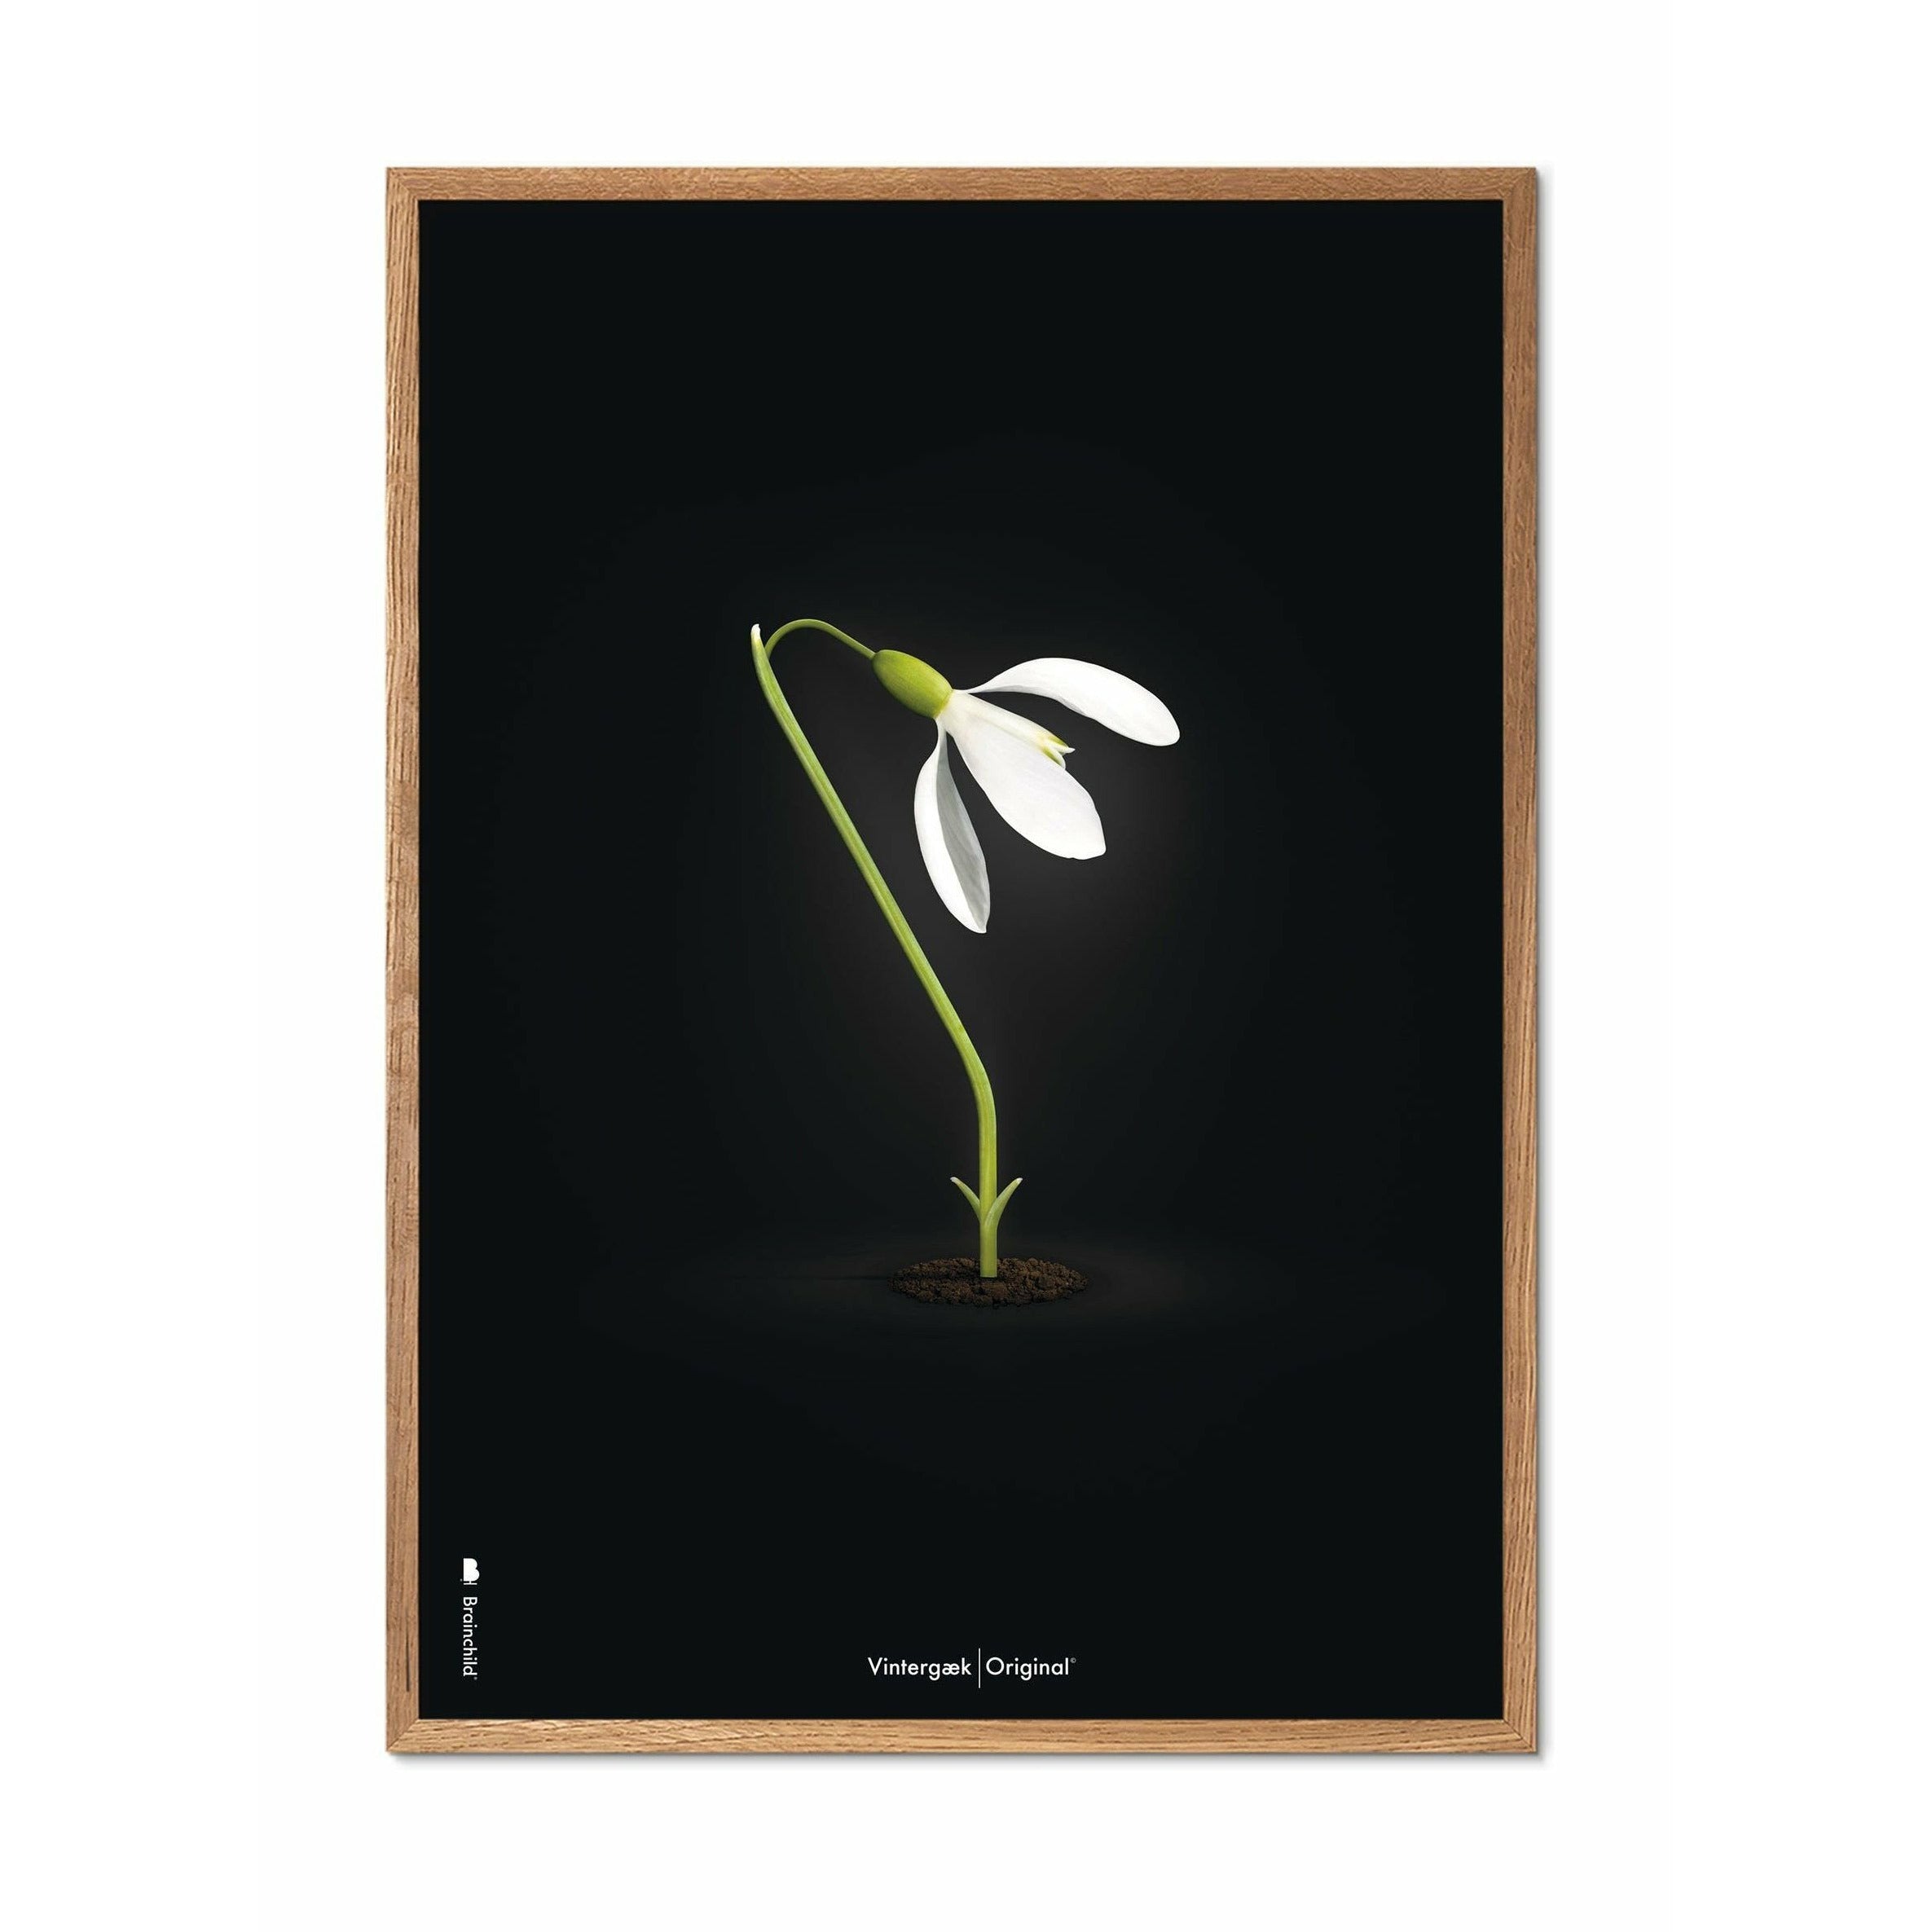 Brainchild Snowdrop Classic Poster, Frame Made Of Light Wood A5, Black Background